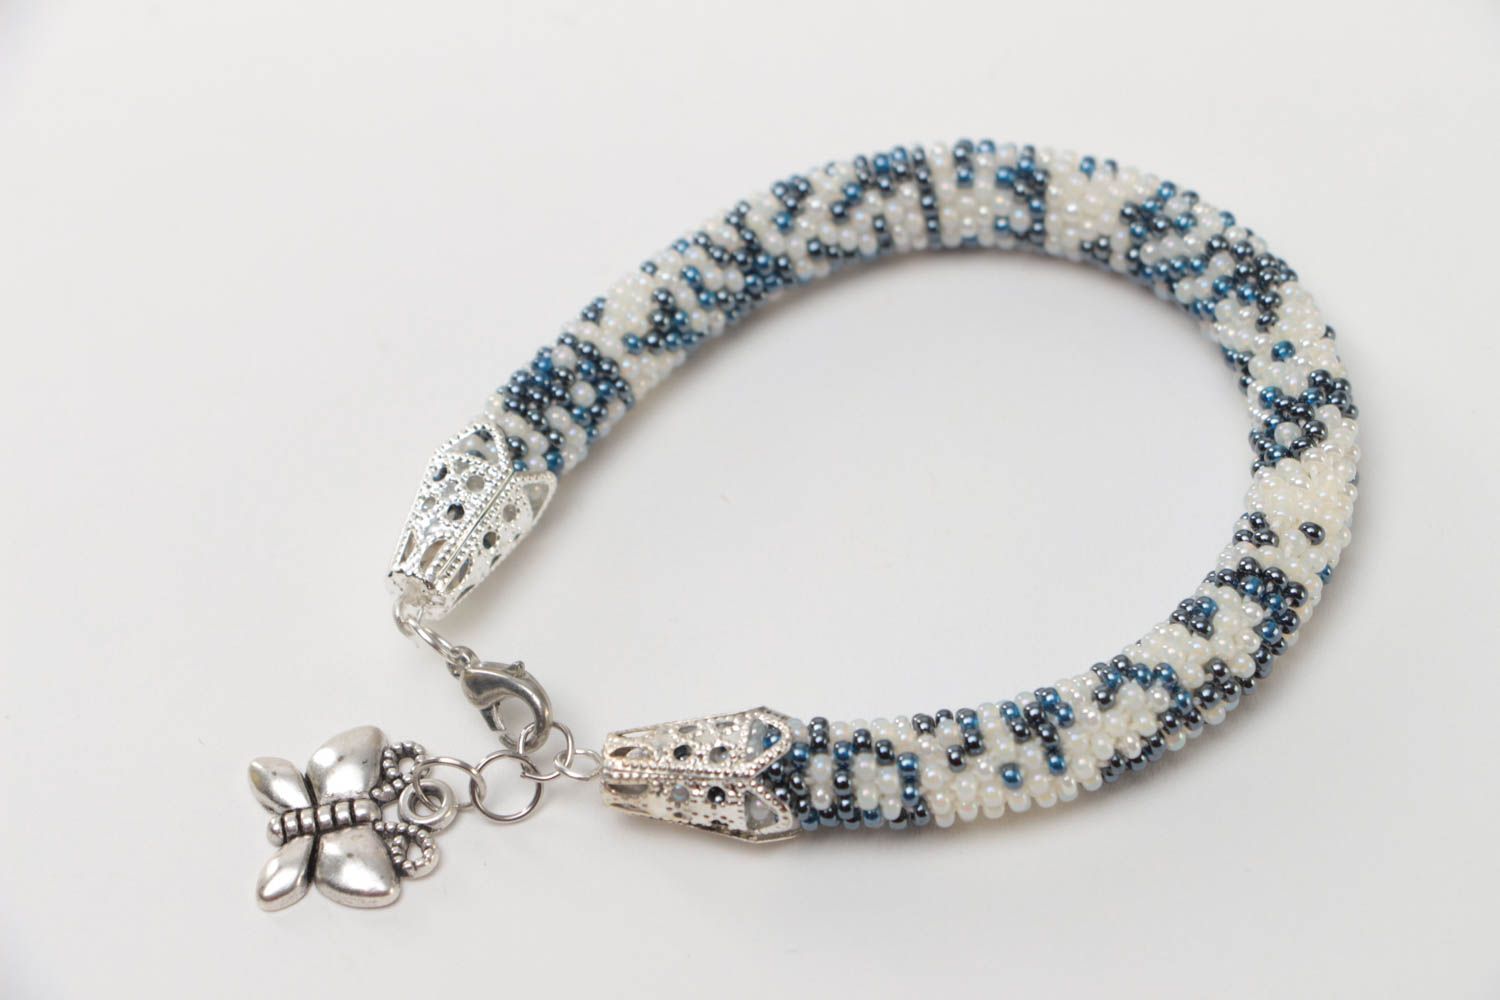 Beautiful handmade beaded cord bracelet with metal charm Butterfly photo 2